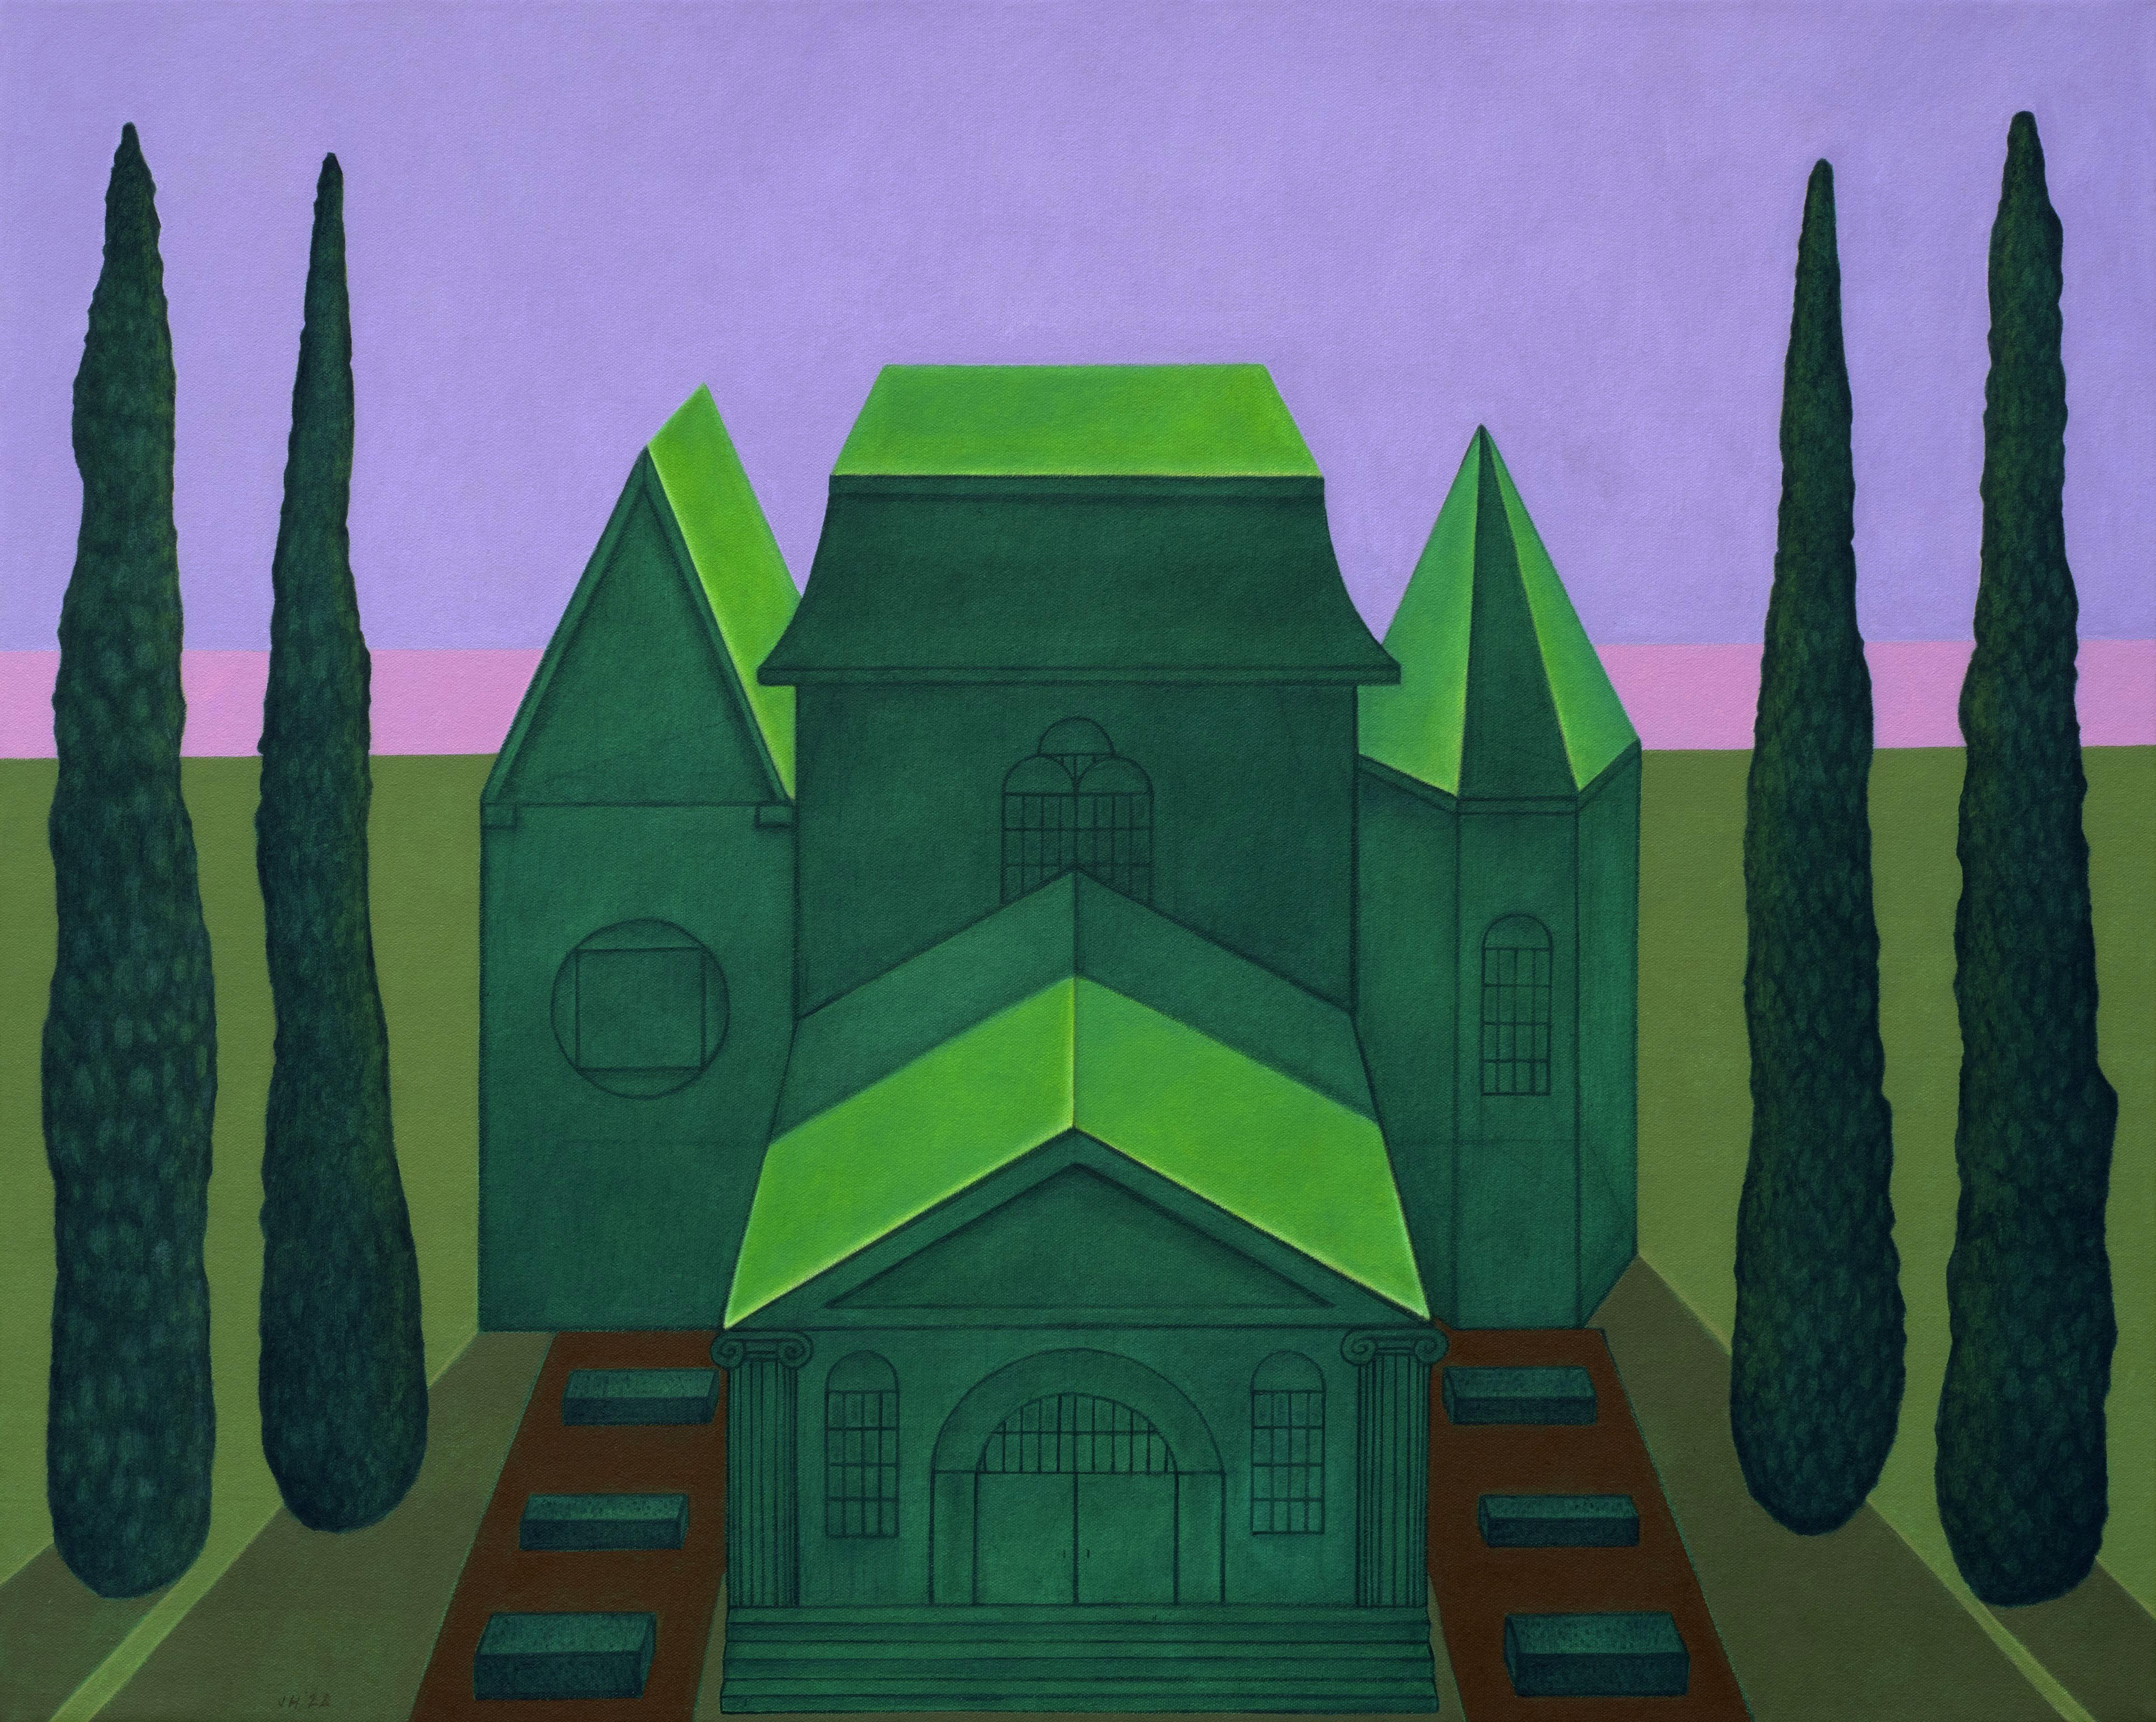 John Hrehov Landscape Painting - The Green House, Surreal Classic Architecture with Italian Cypress Trees